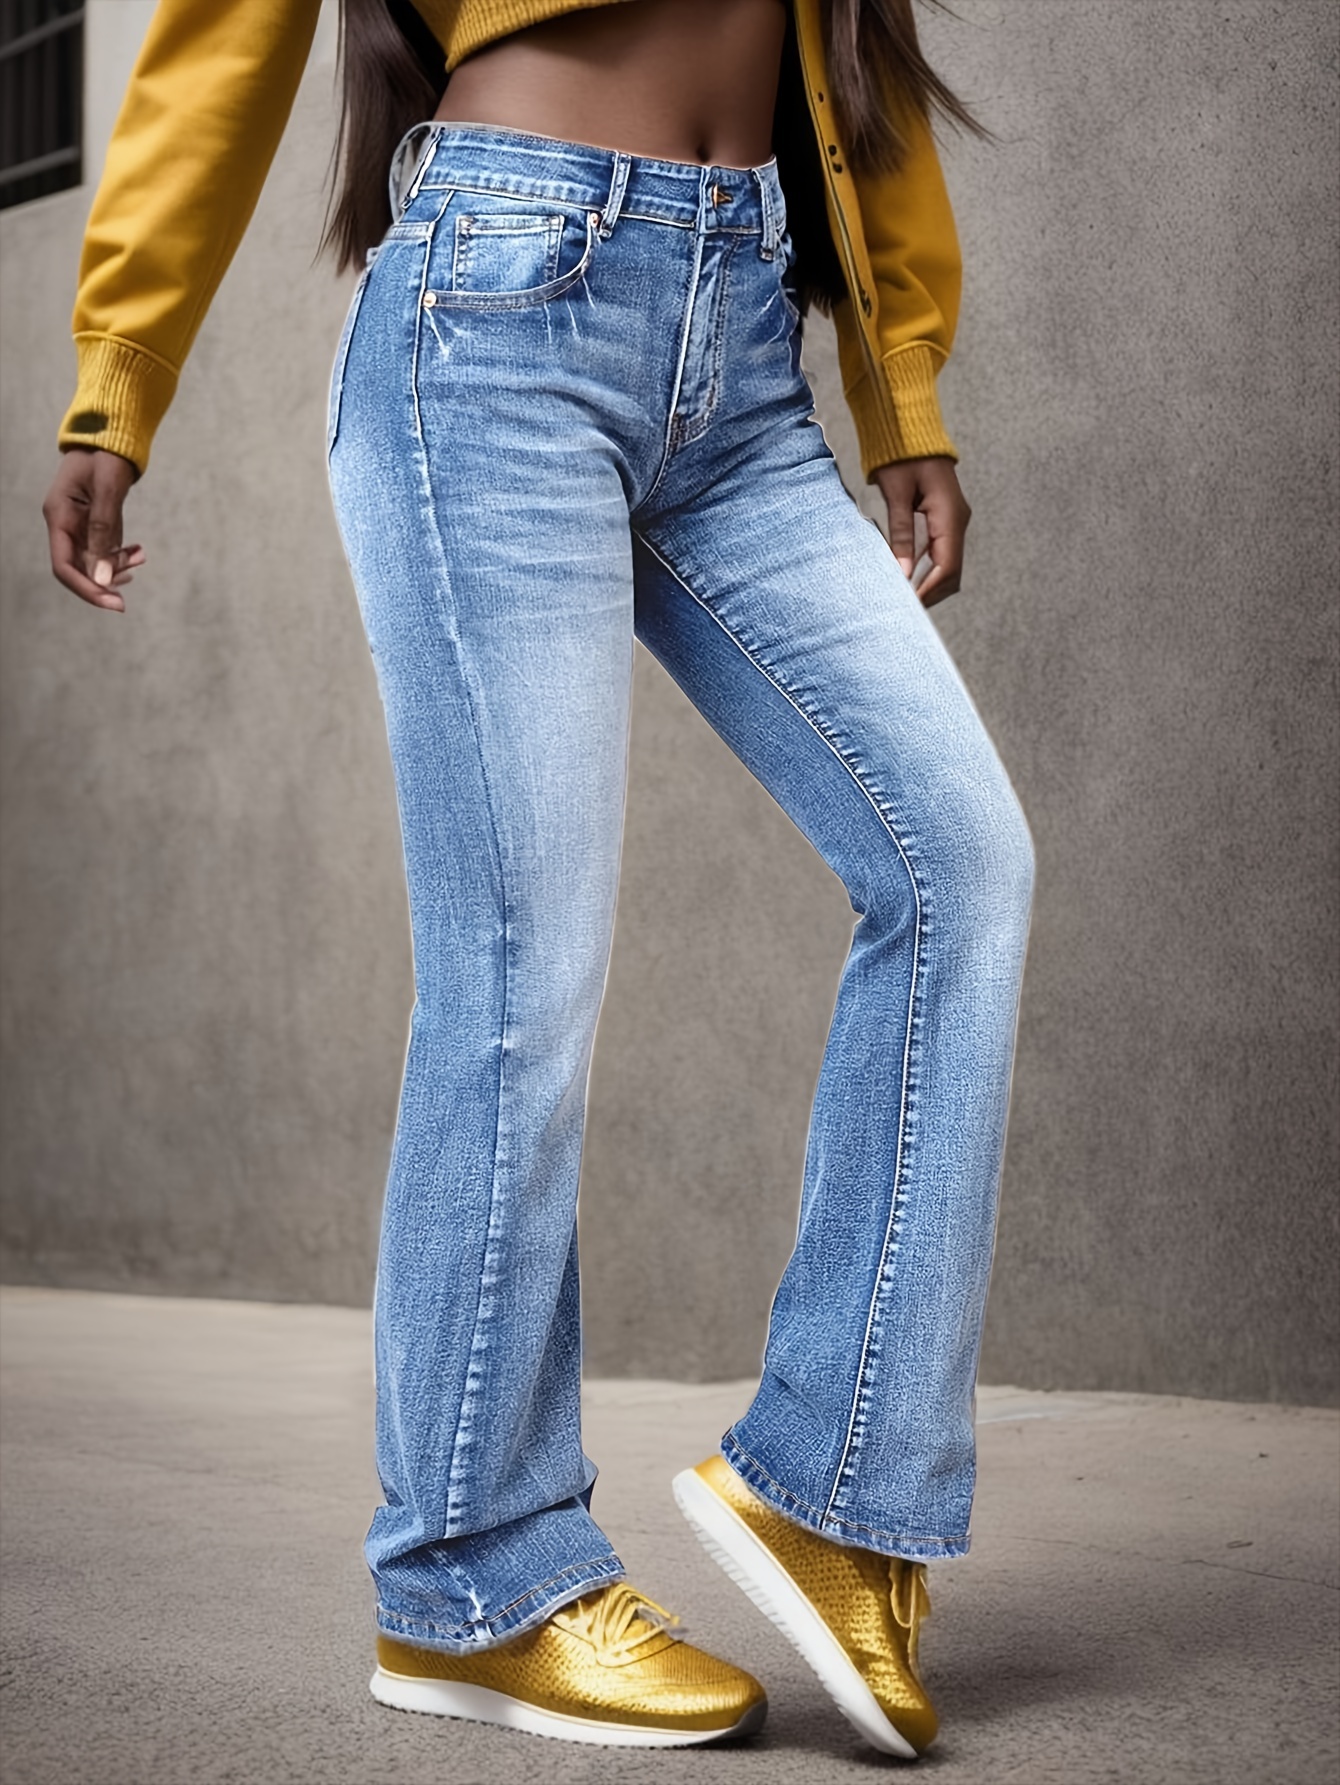 blue water ripple embossed flare jeans high waist high stretch washed denim trousers womens denim jeans clothing details 2